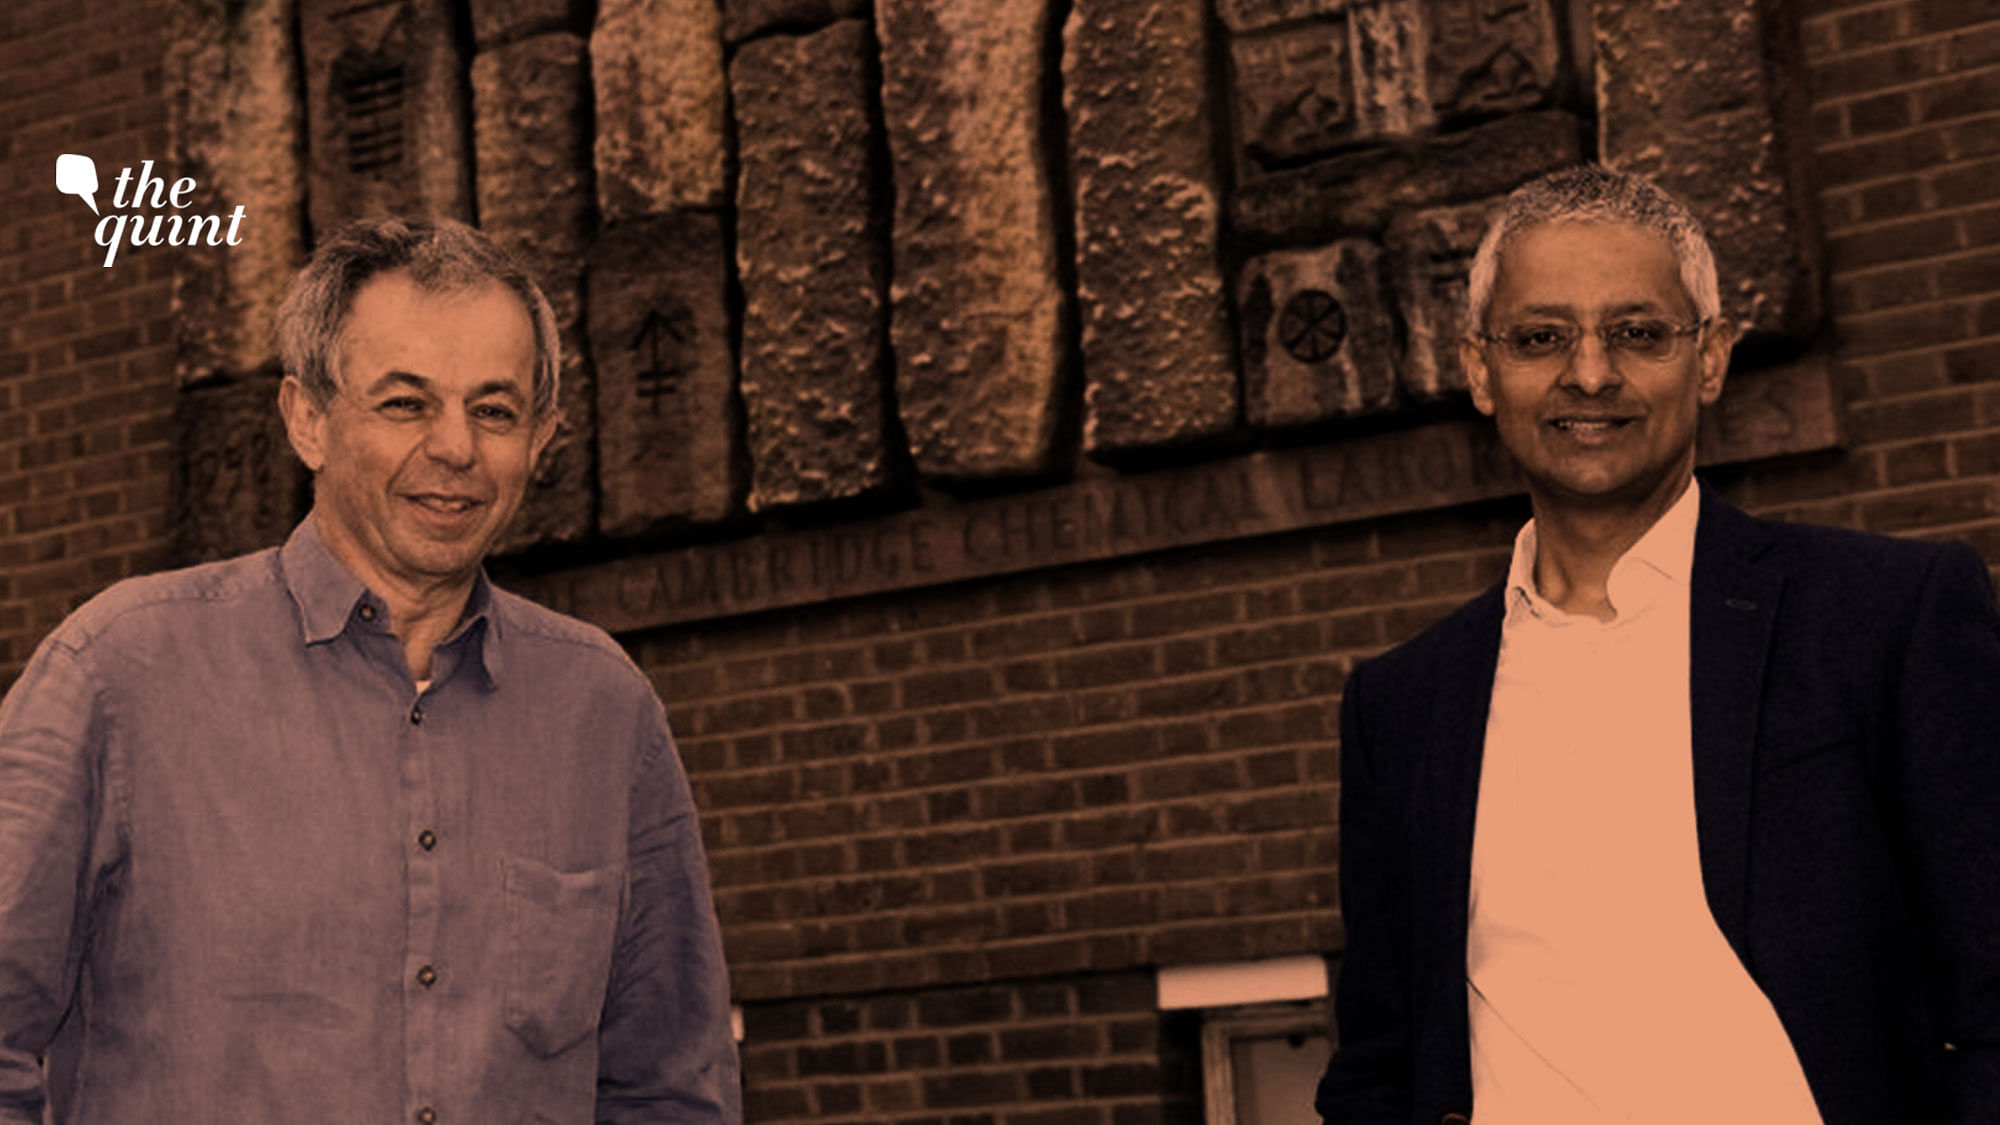 Balasubramanian and Klenerman were awarded for their development of revolutionary Next Generation DNA sequencing to find the new variants of COVID-19.